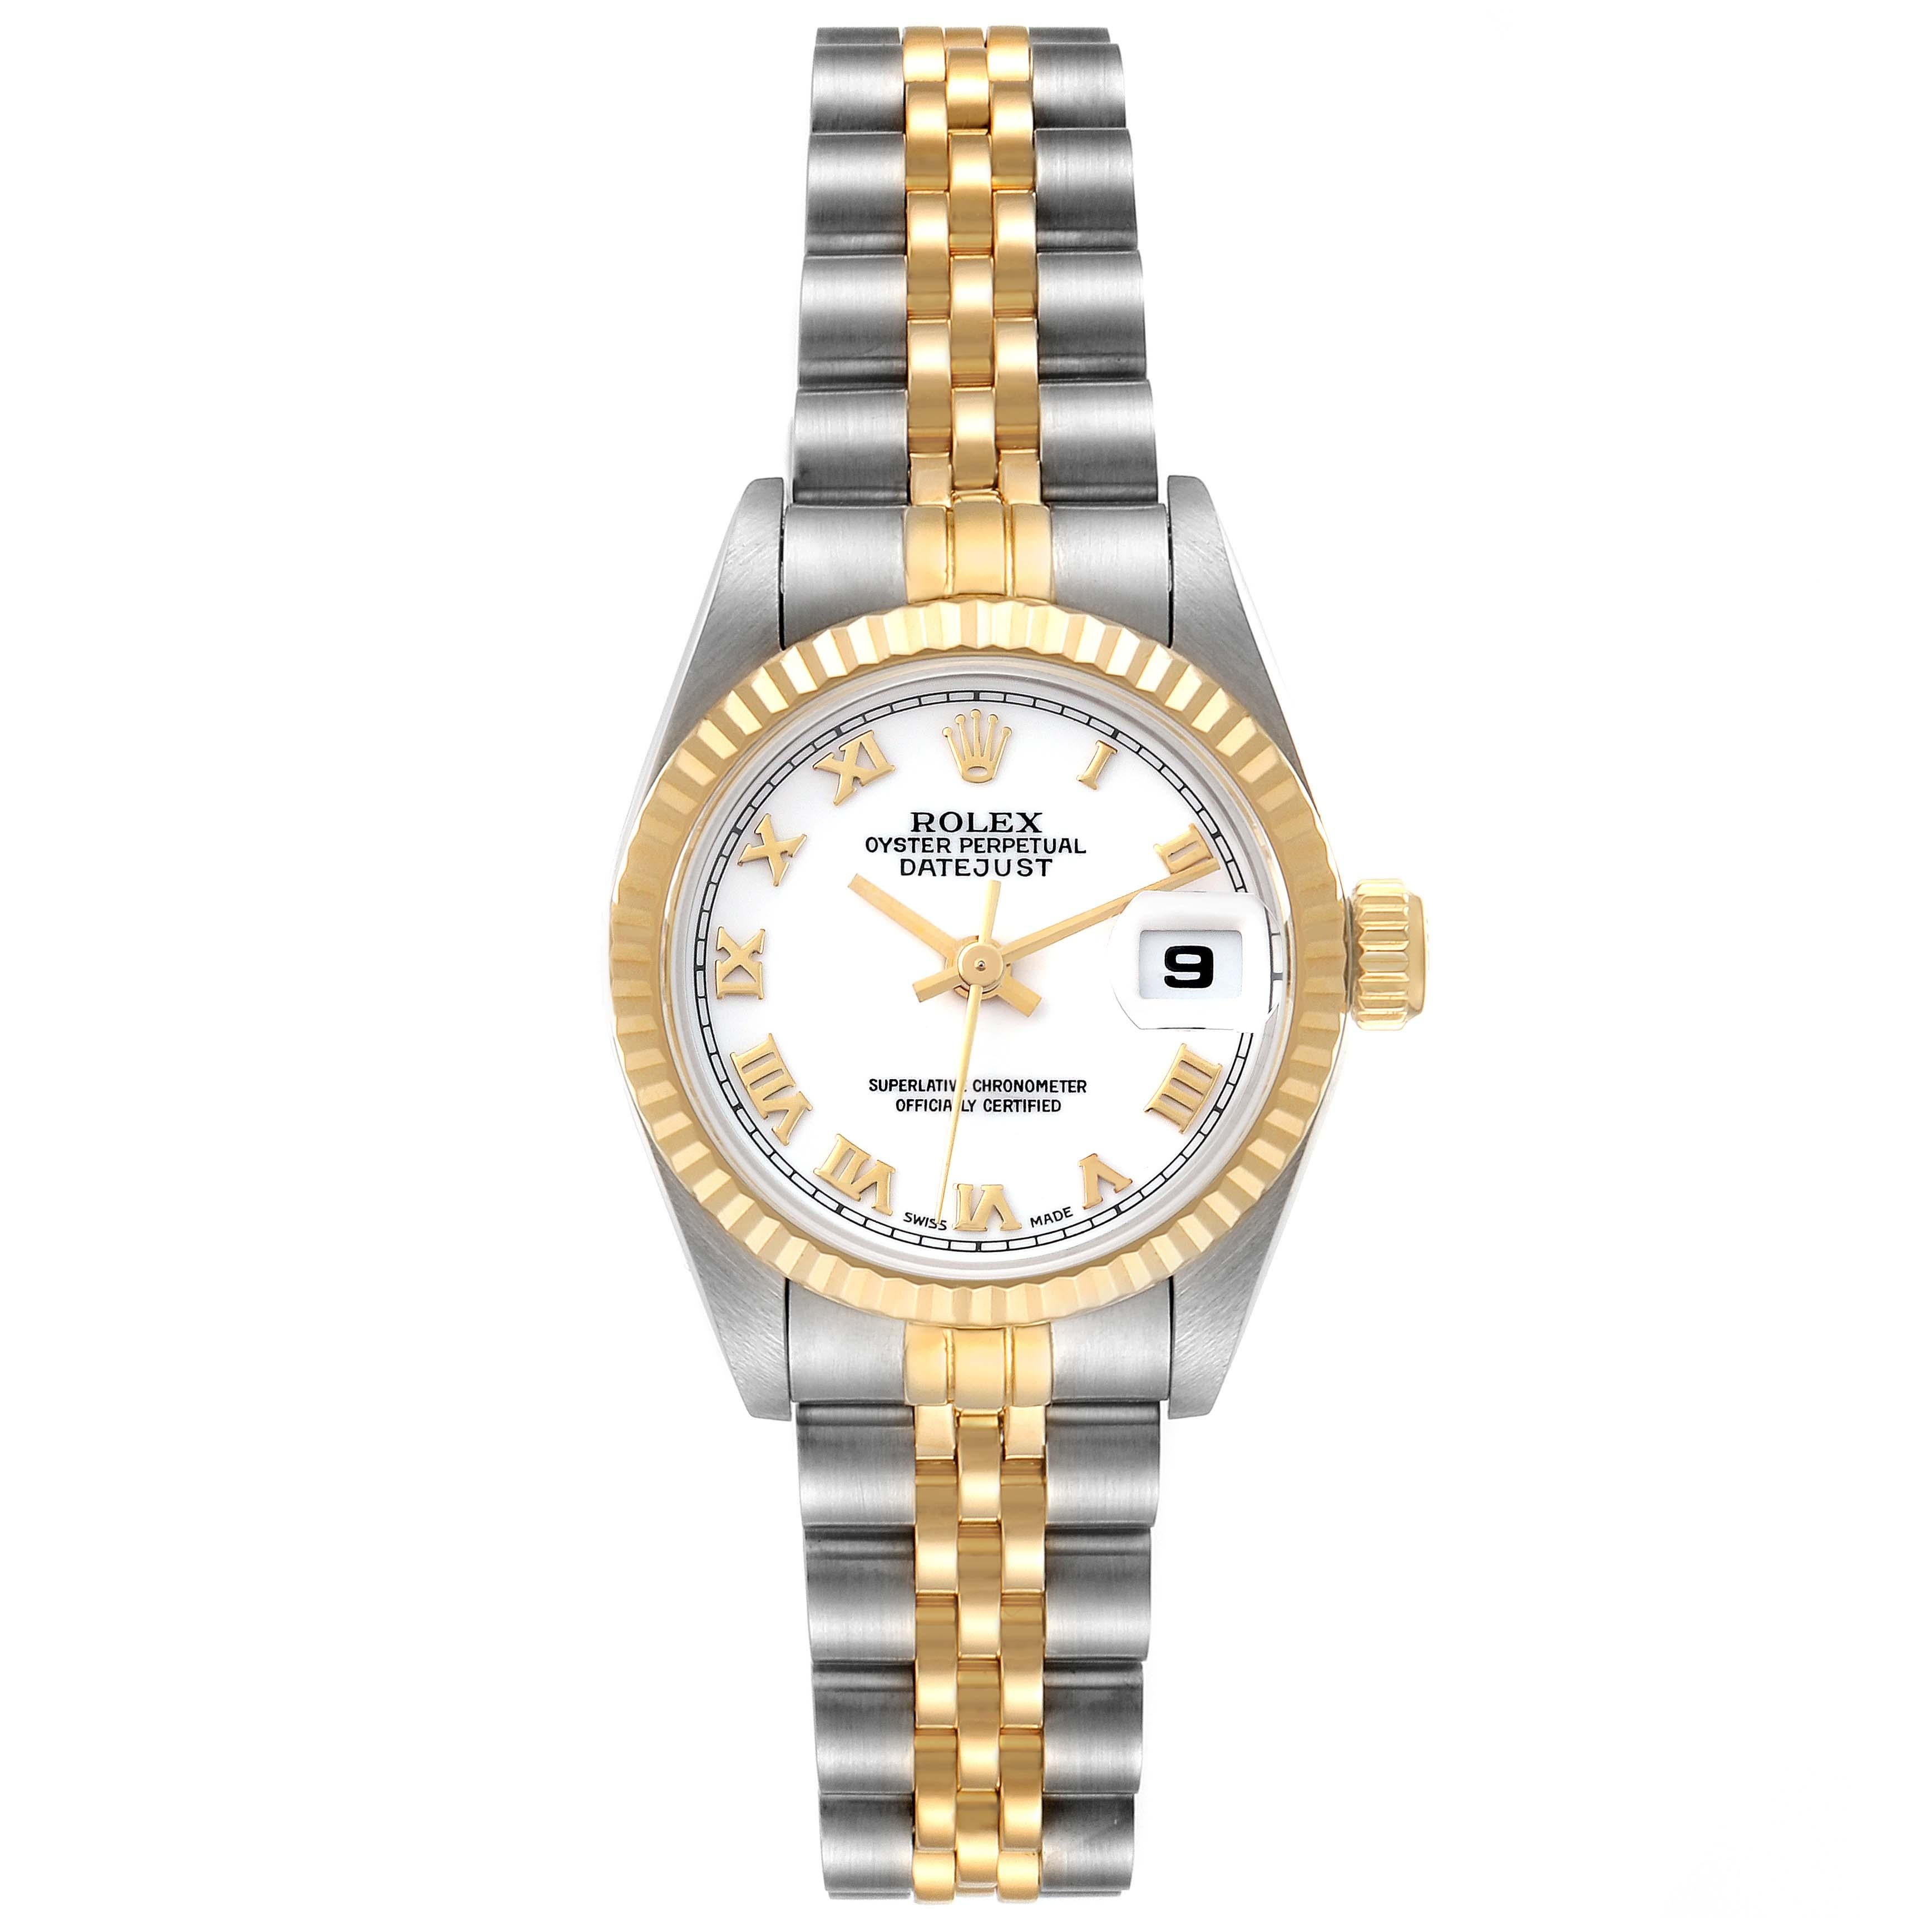 Rolex Datejust White Roman Dial Steel Yellow Gold Ladies Watch 69173. Officially certified chronometer automatic self-winding movement. Stainless steel oyster case 26.0 mm in diameter. Rolex logo on the crown. 18k yellow gold fluted bezel. Scratch